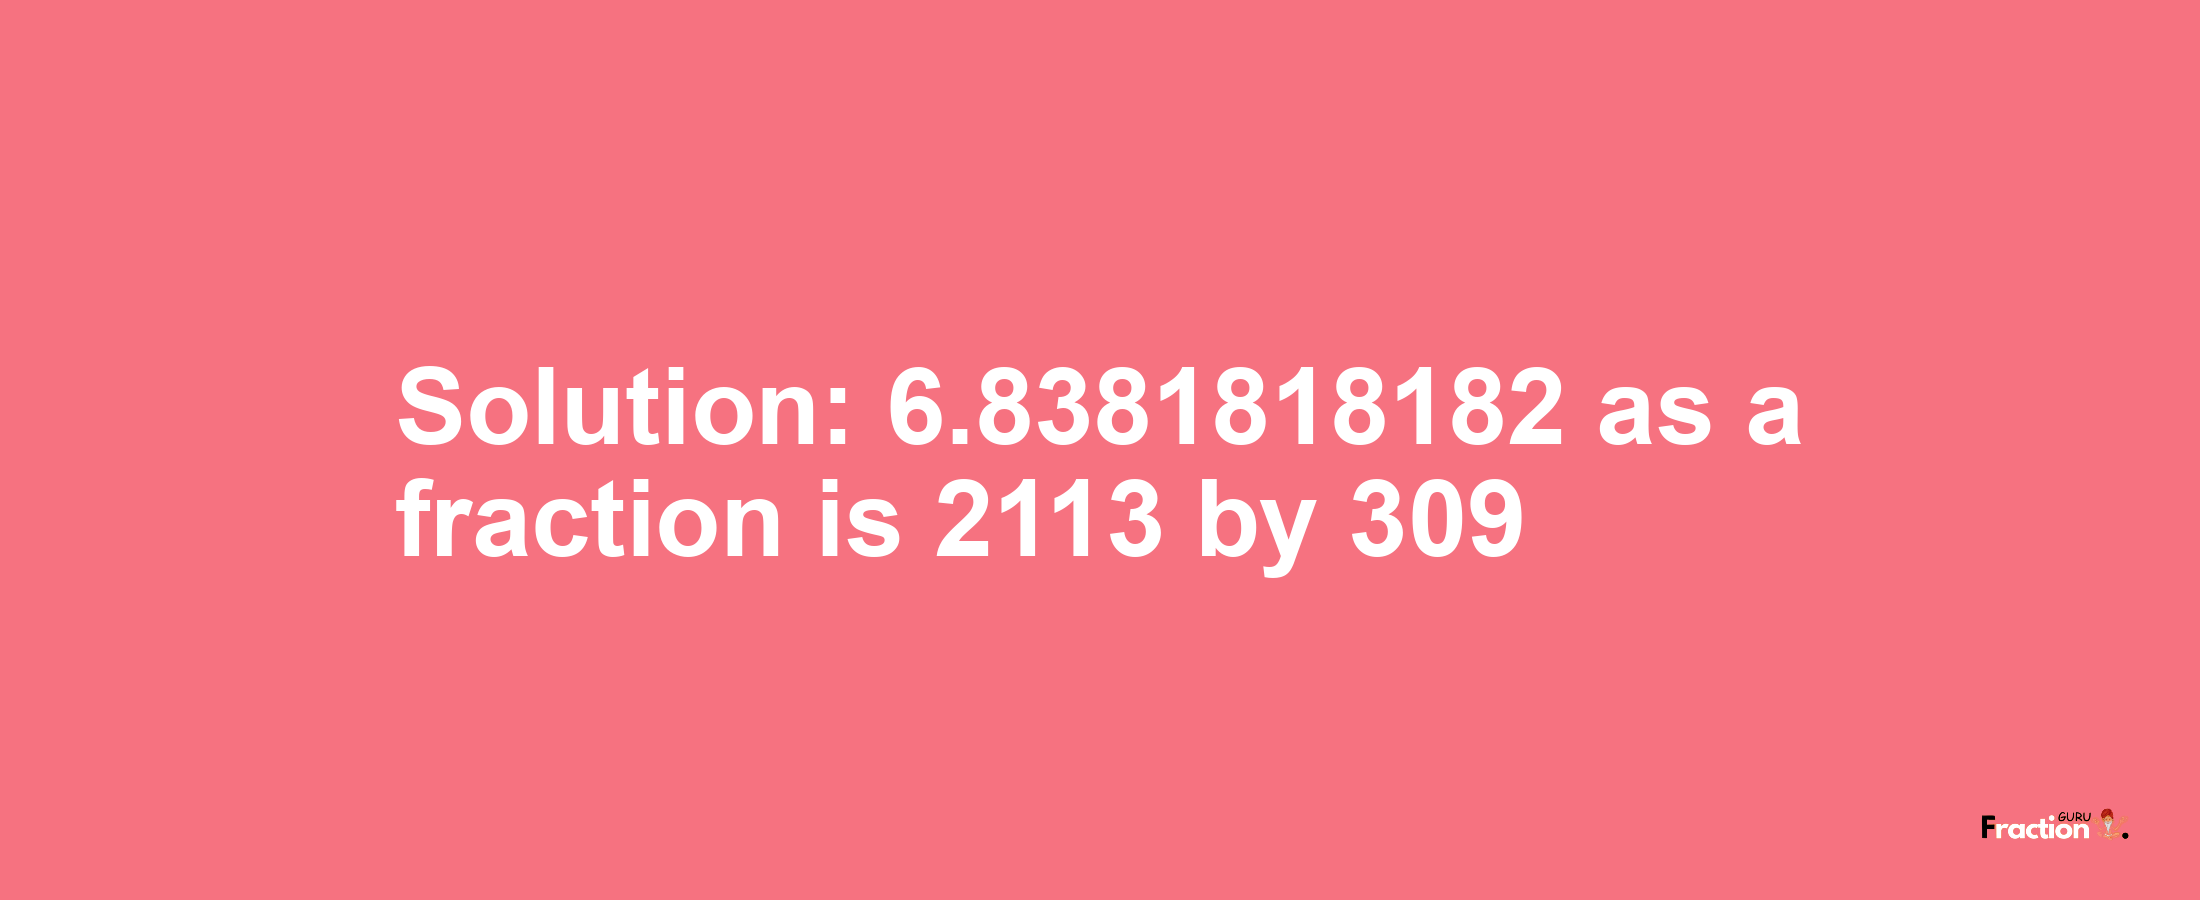 Solution:6.8381818182 as a fraction is 2113/309